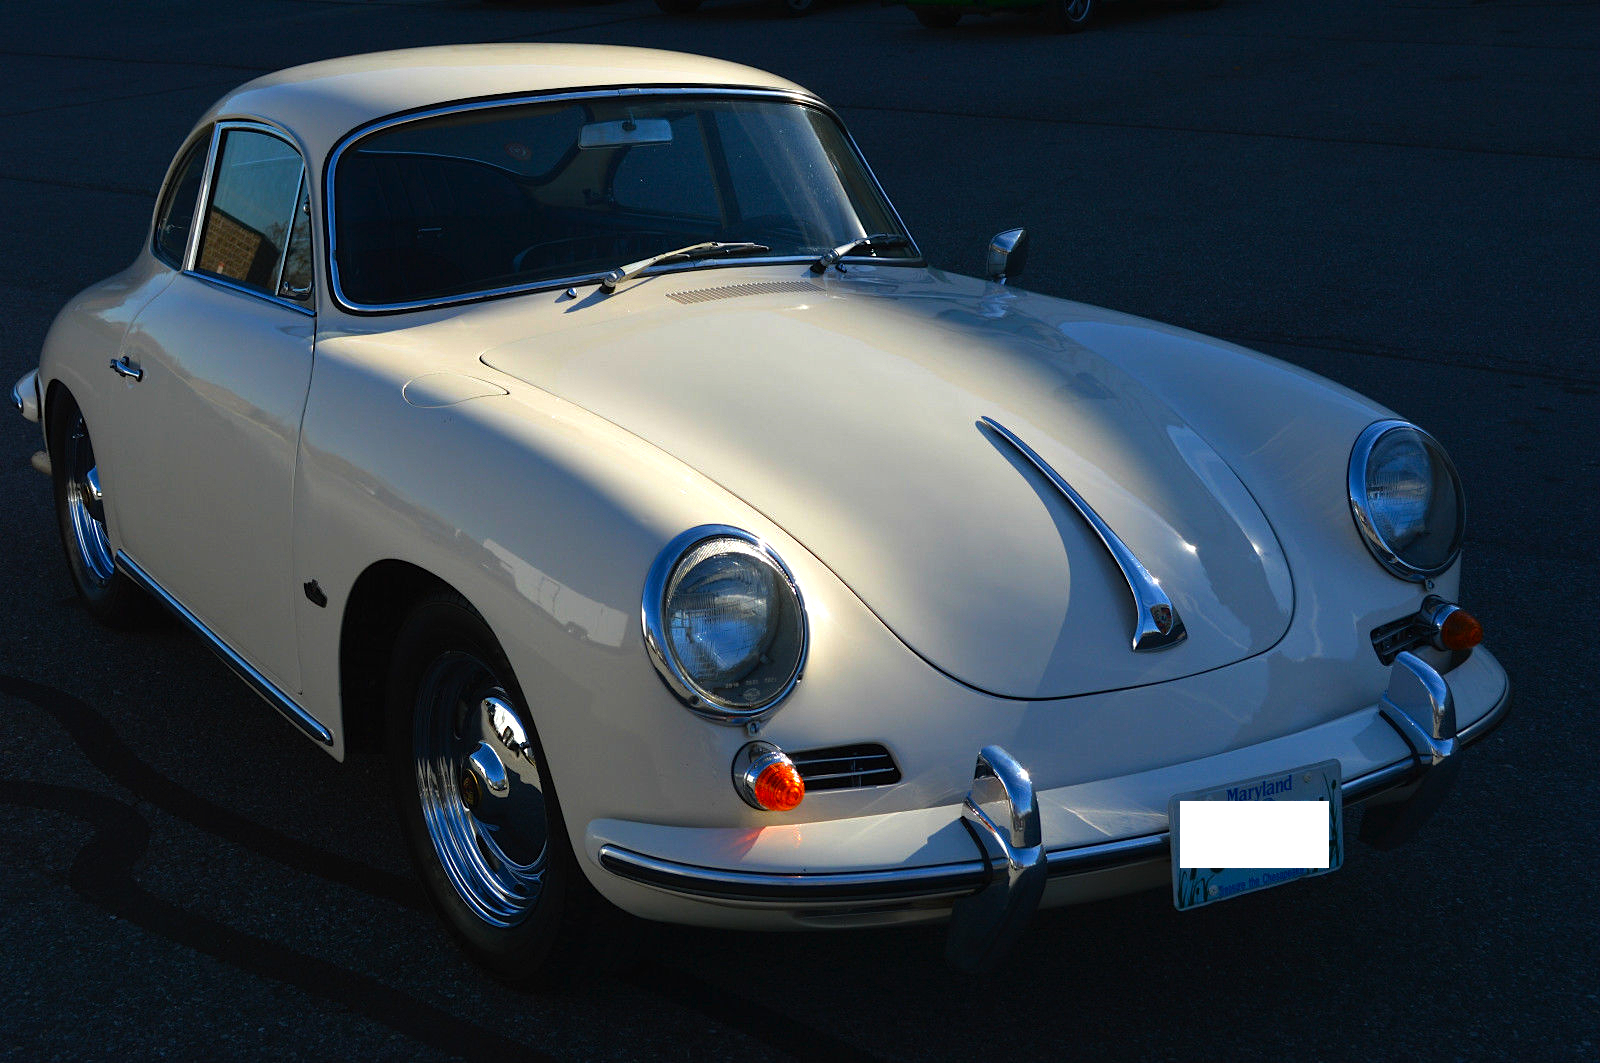 An "as new" Porsche 356B. This is what the project car could finish up like. (Picture courtesy of mint2me.com)